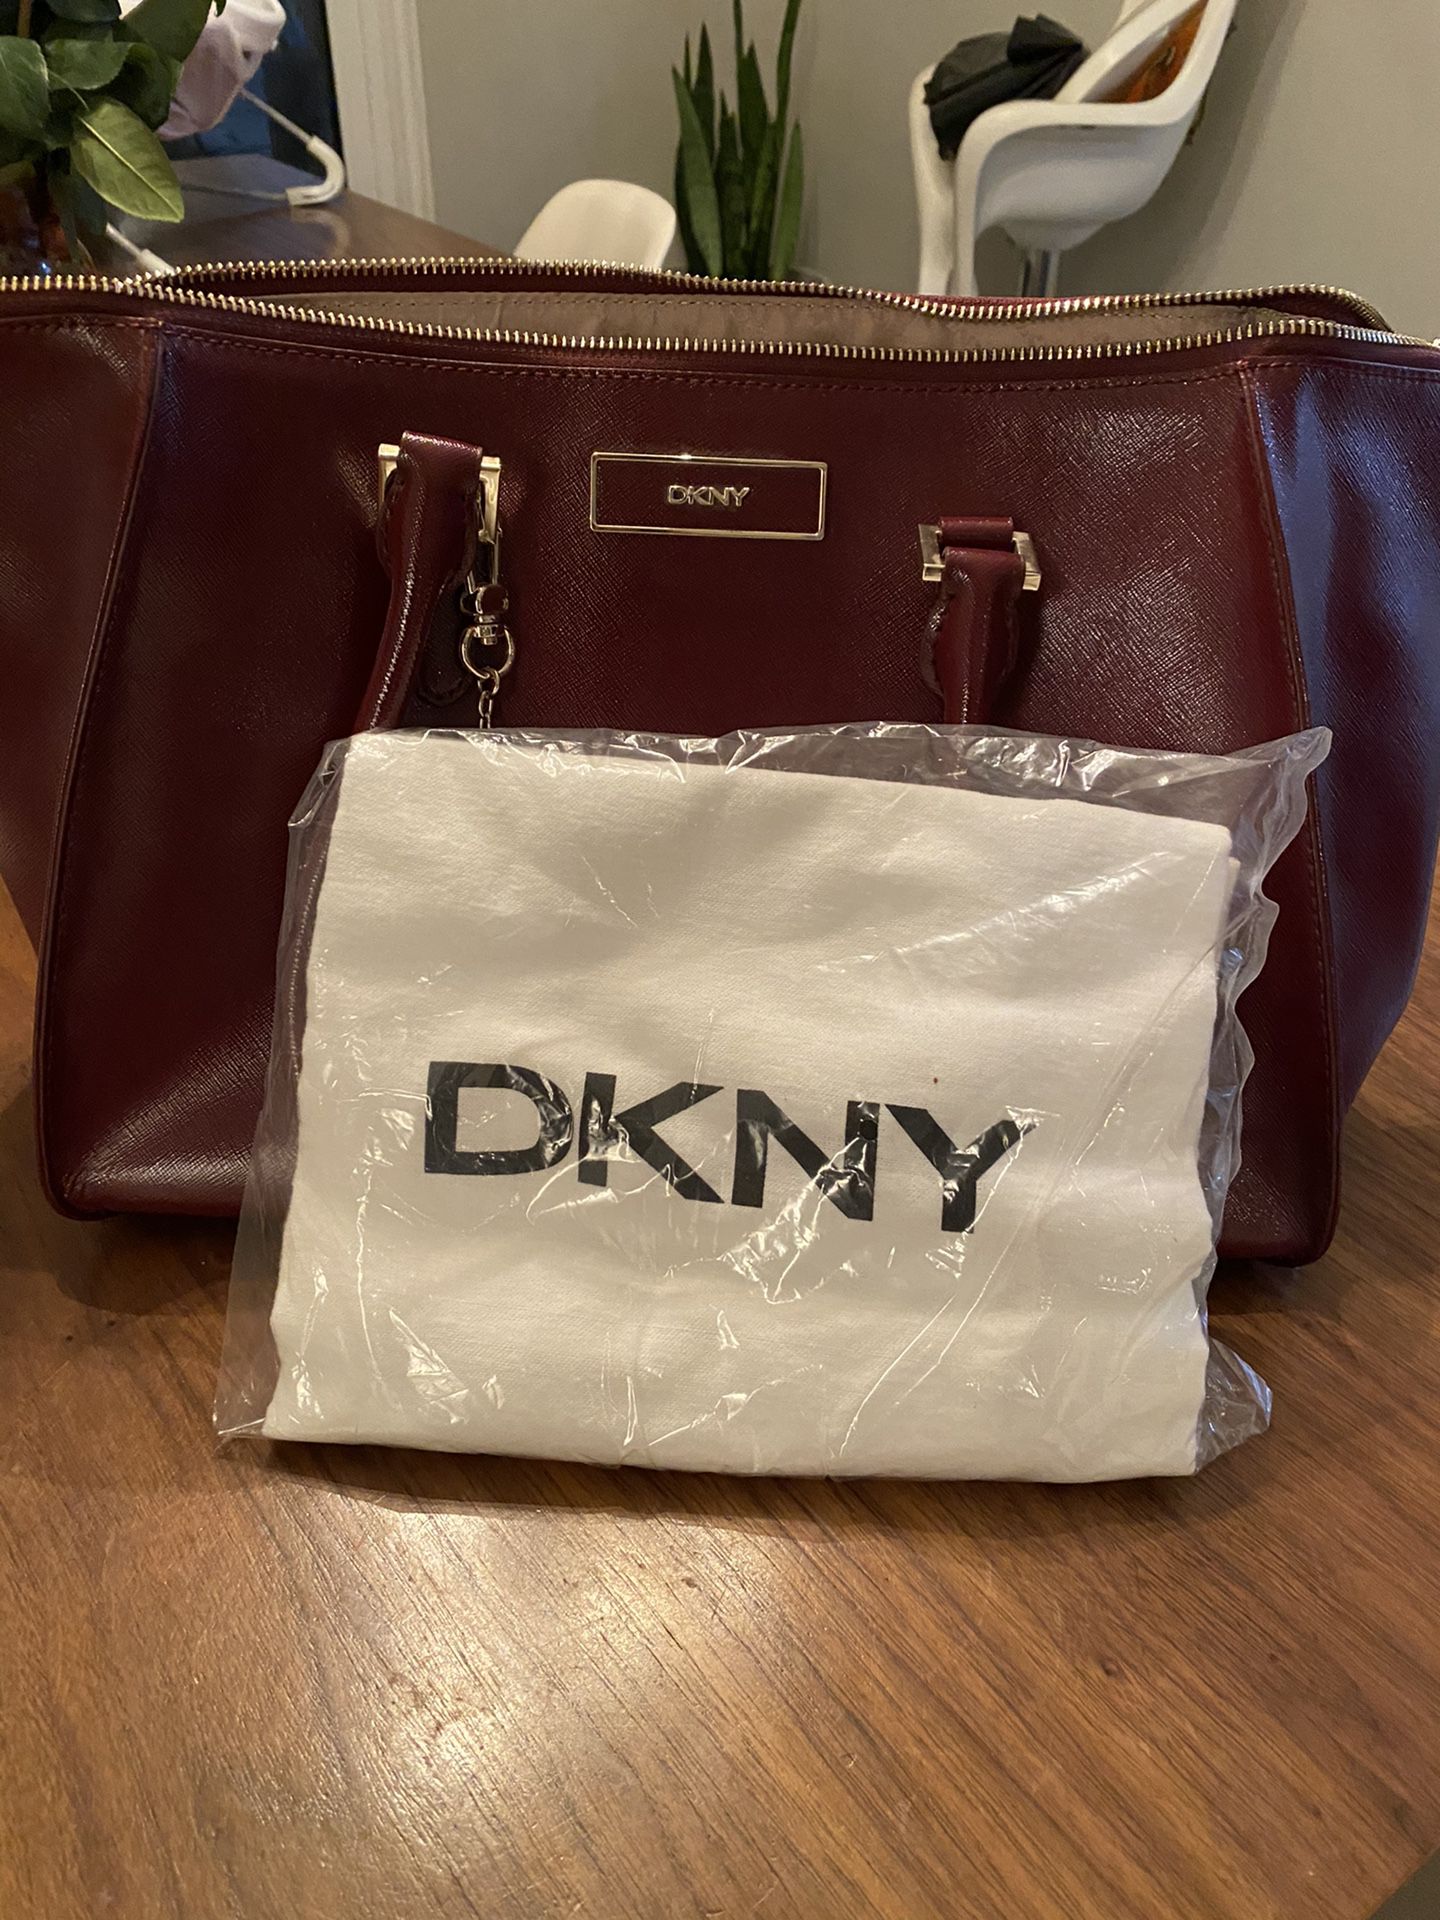 DKNY PURSE IN EXCELLENT CONDITION